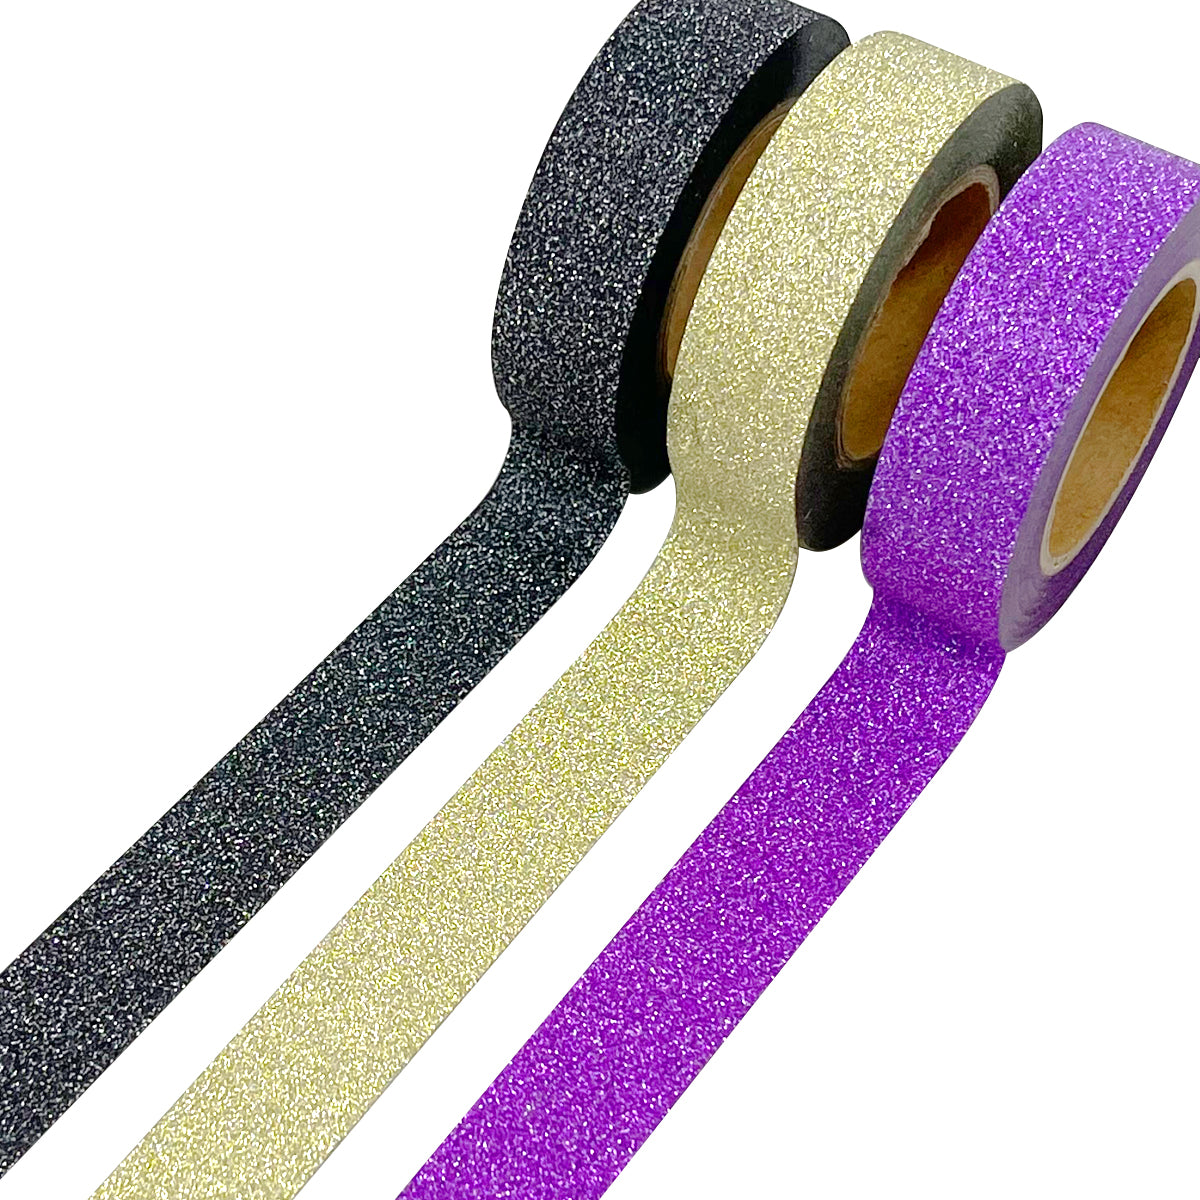 Wrapables Glitter and Shine Washi Tapes Decorative Masking Tapes (Set of 3) Silver Glitz and Glitter